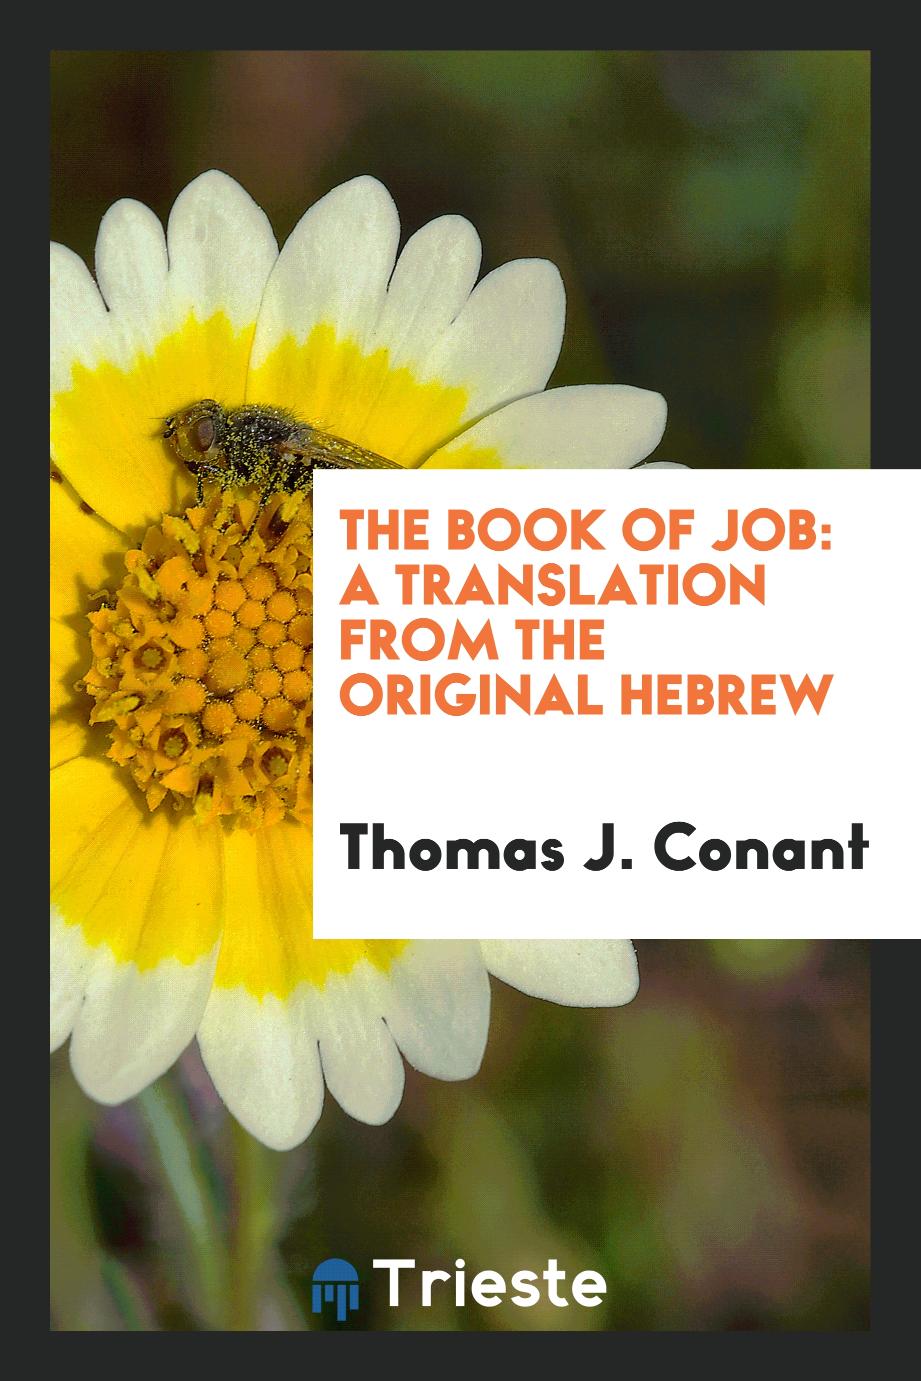 The Book of Job: A Translation from the Original Hebrew